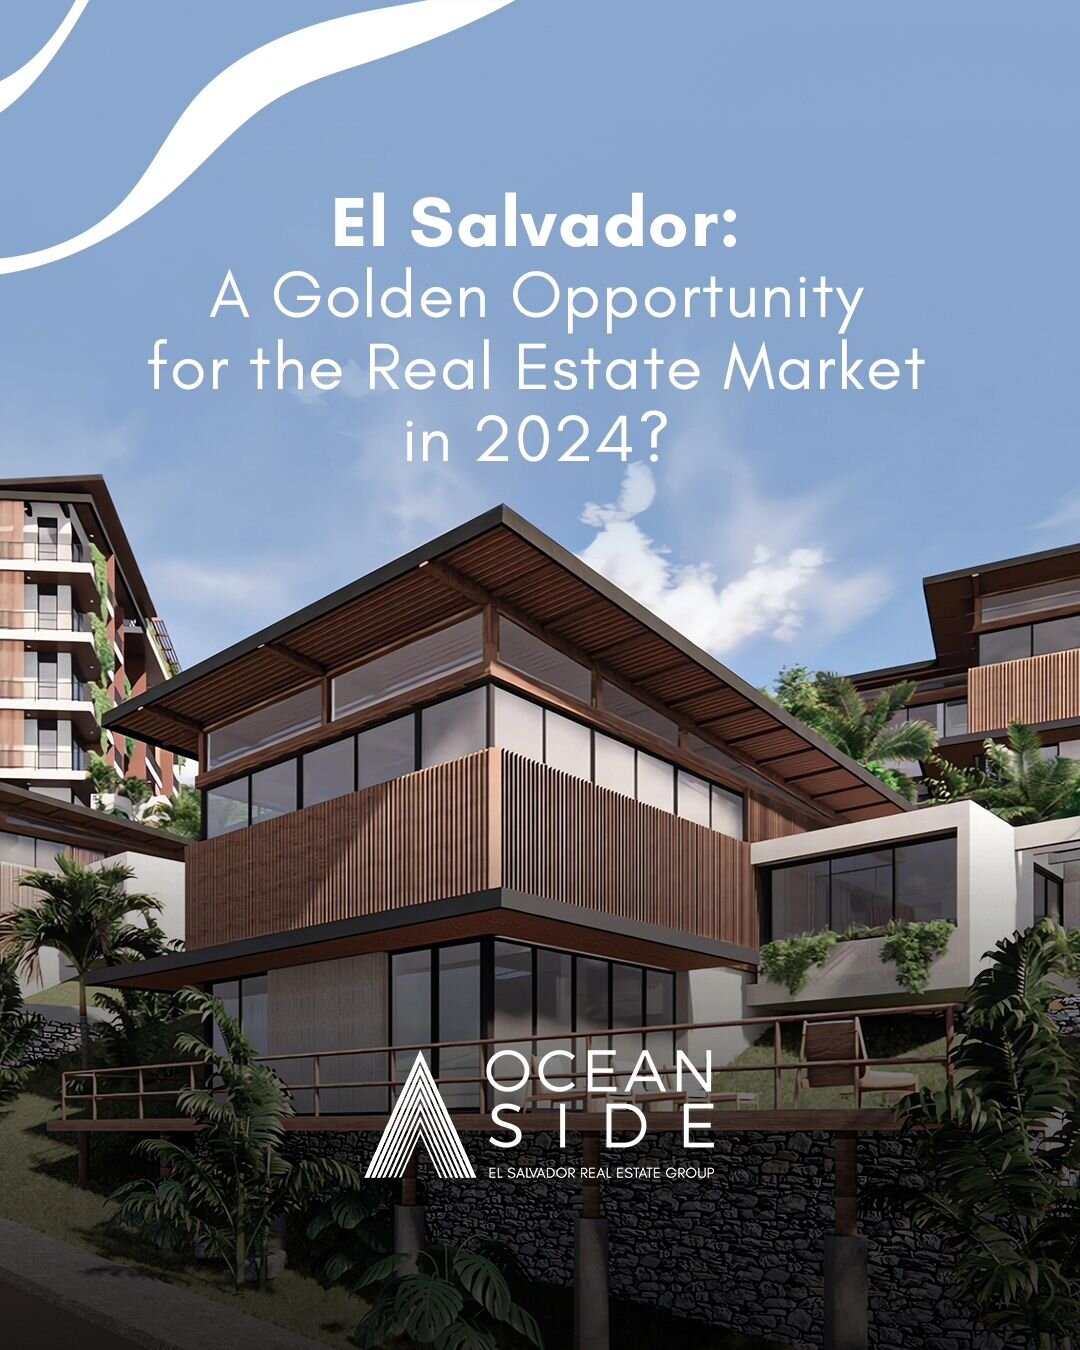 In El Salvador, 2024 holds great promise for the real estate market, making it an opportune time to invest in this beautiful country.

Do you have a passion for adventure? Tourism is booming, driving demand for #VacationRentals.

Looking for stabilit